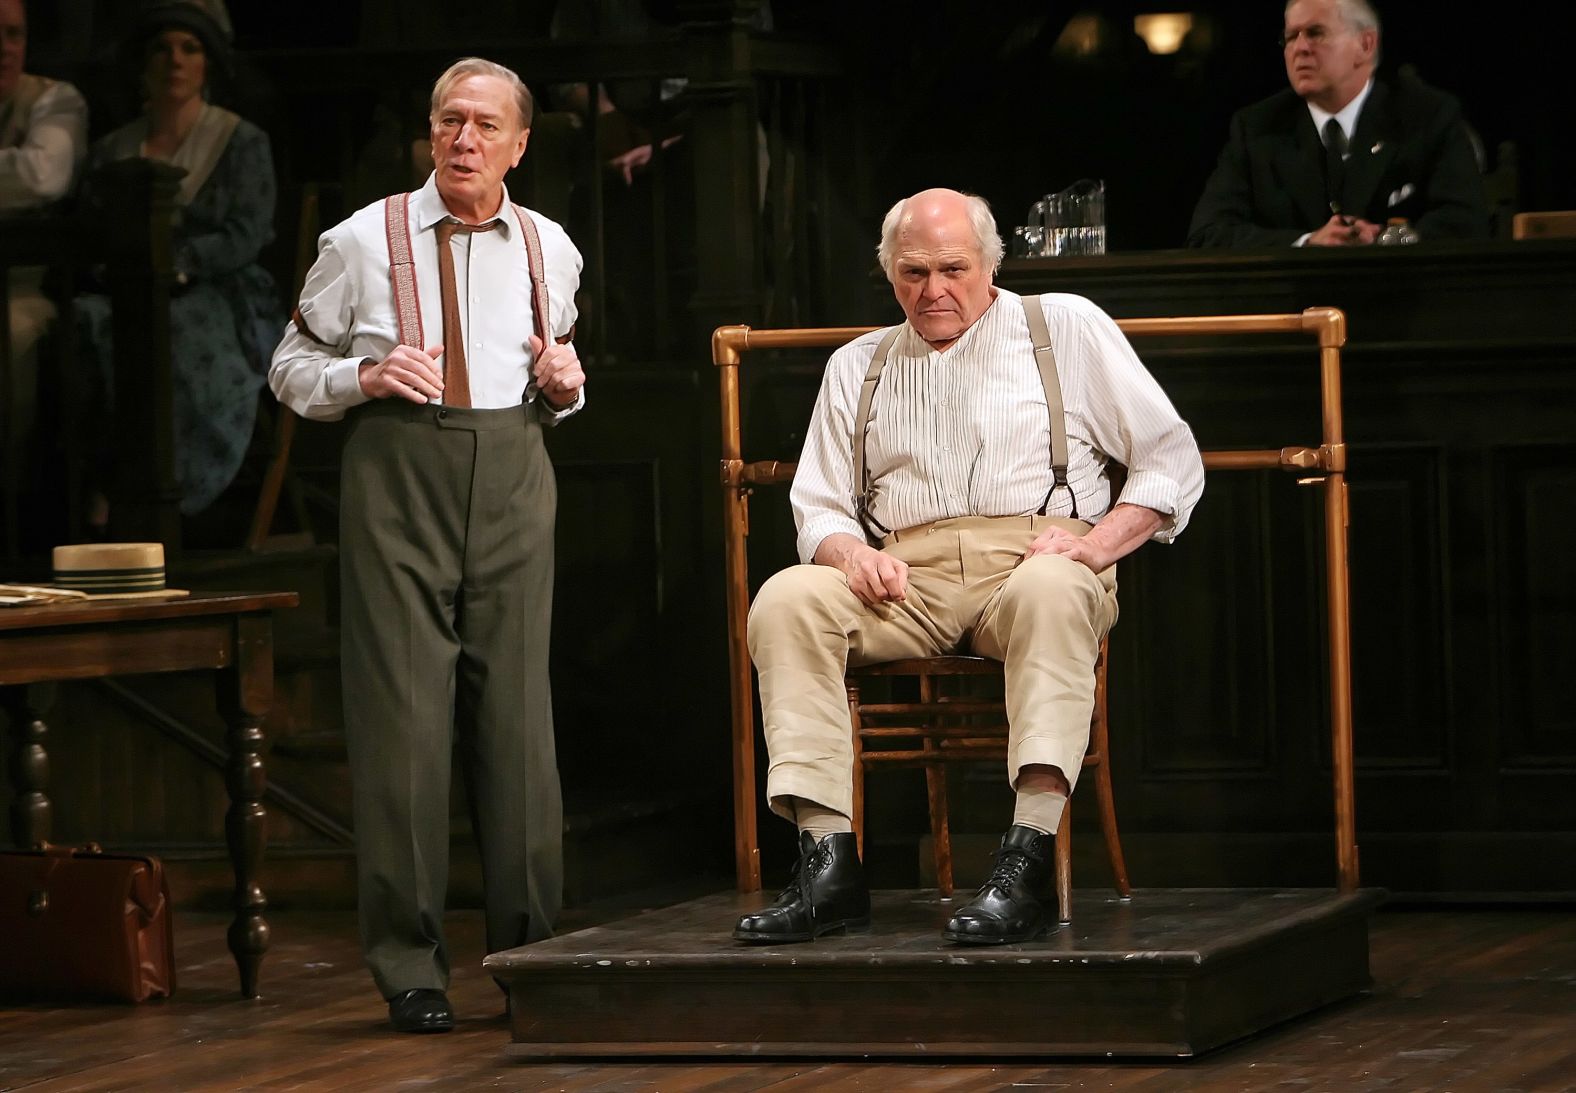 Plummer and Brian Dennehy appear on stage together in the 2007 Broadway production of "Inherit the Wind."